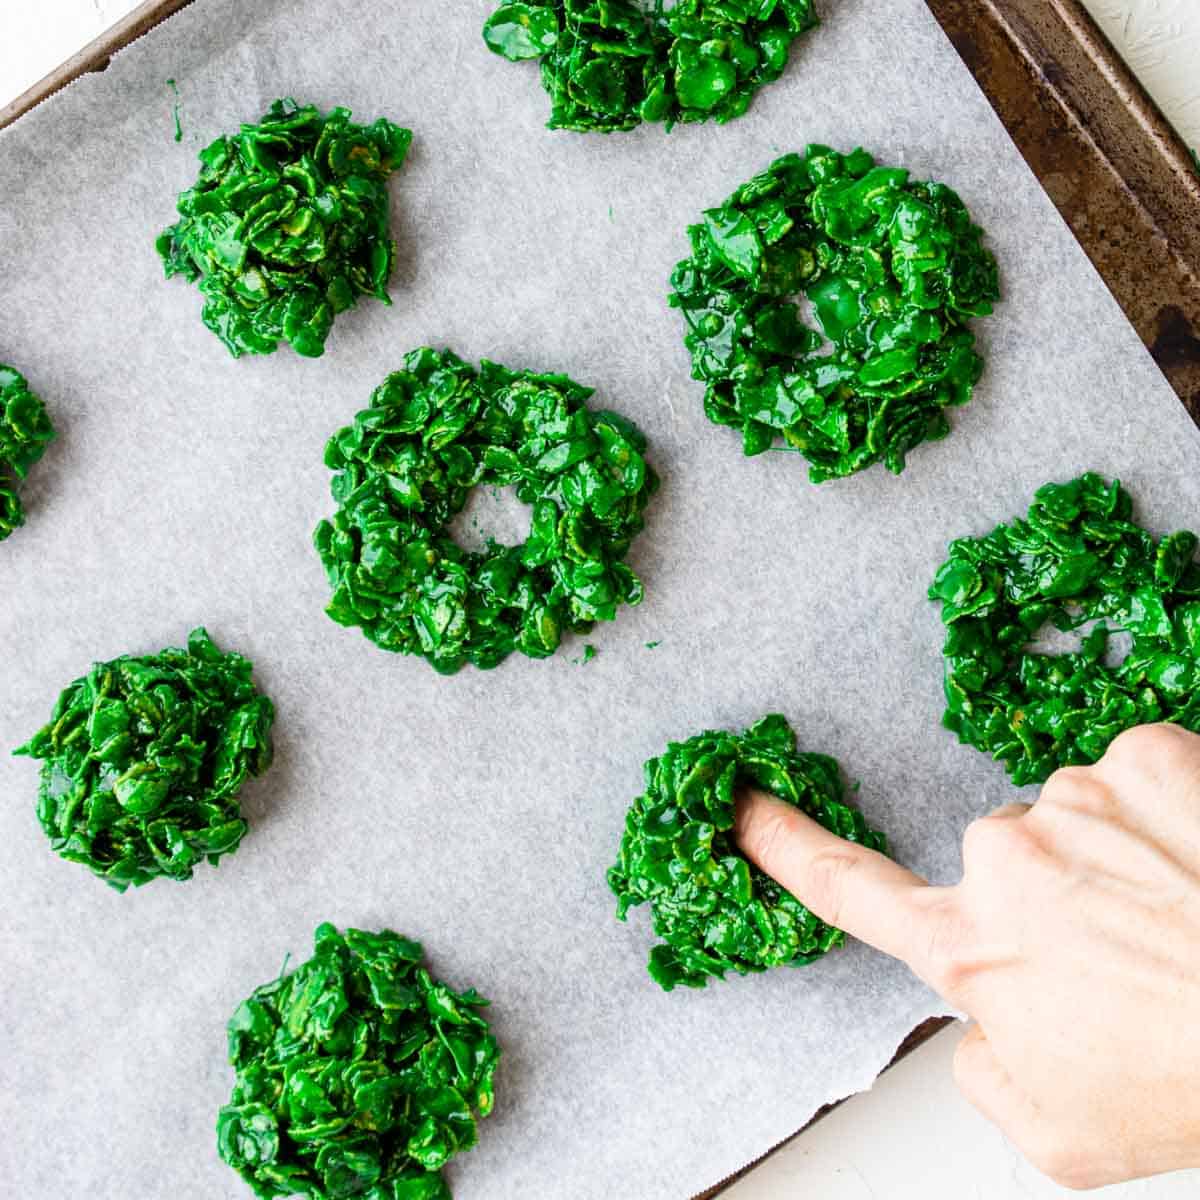 showing how to make cornflake wreaths by placing your finger in the center